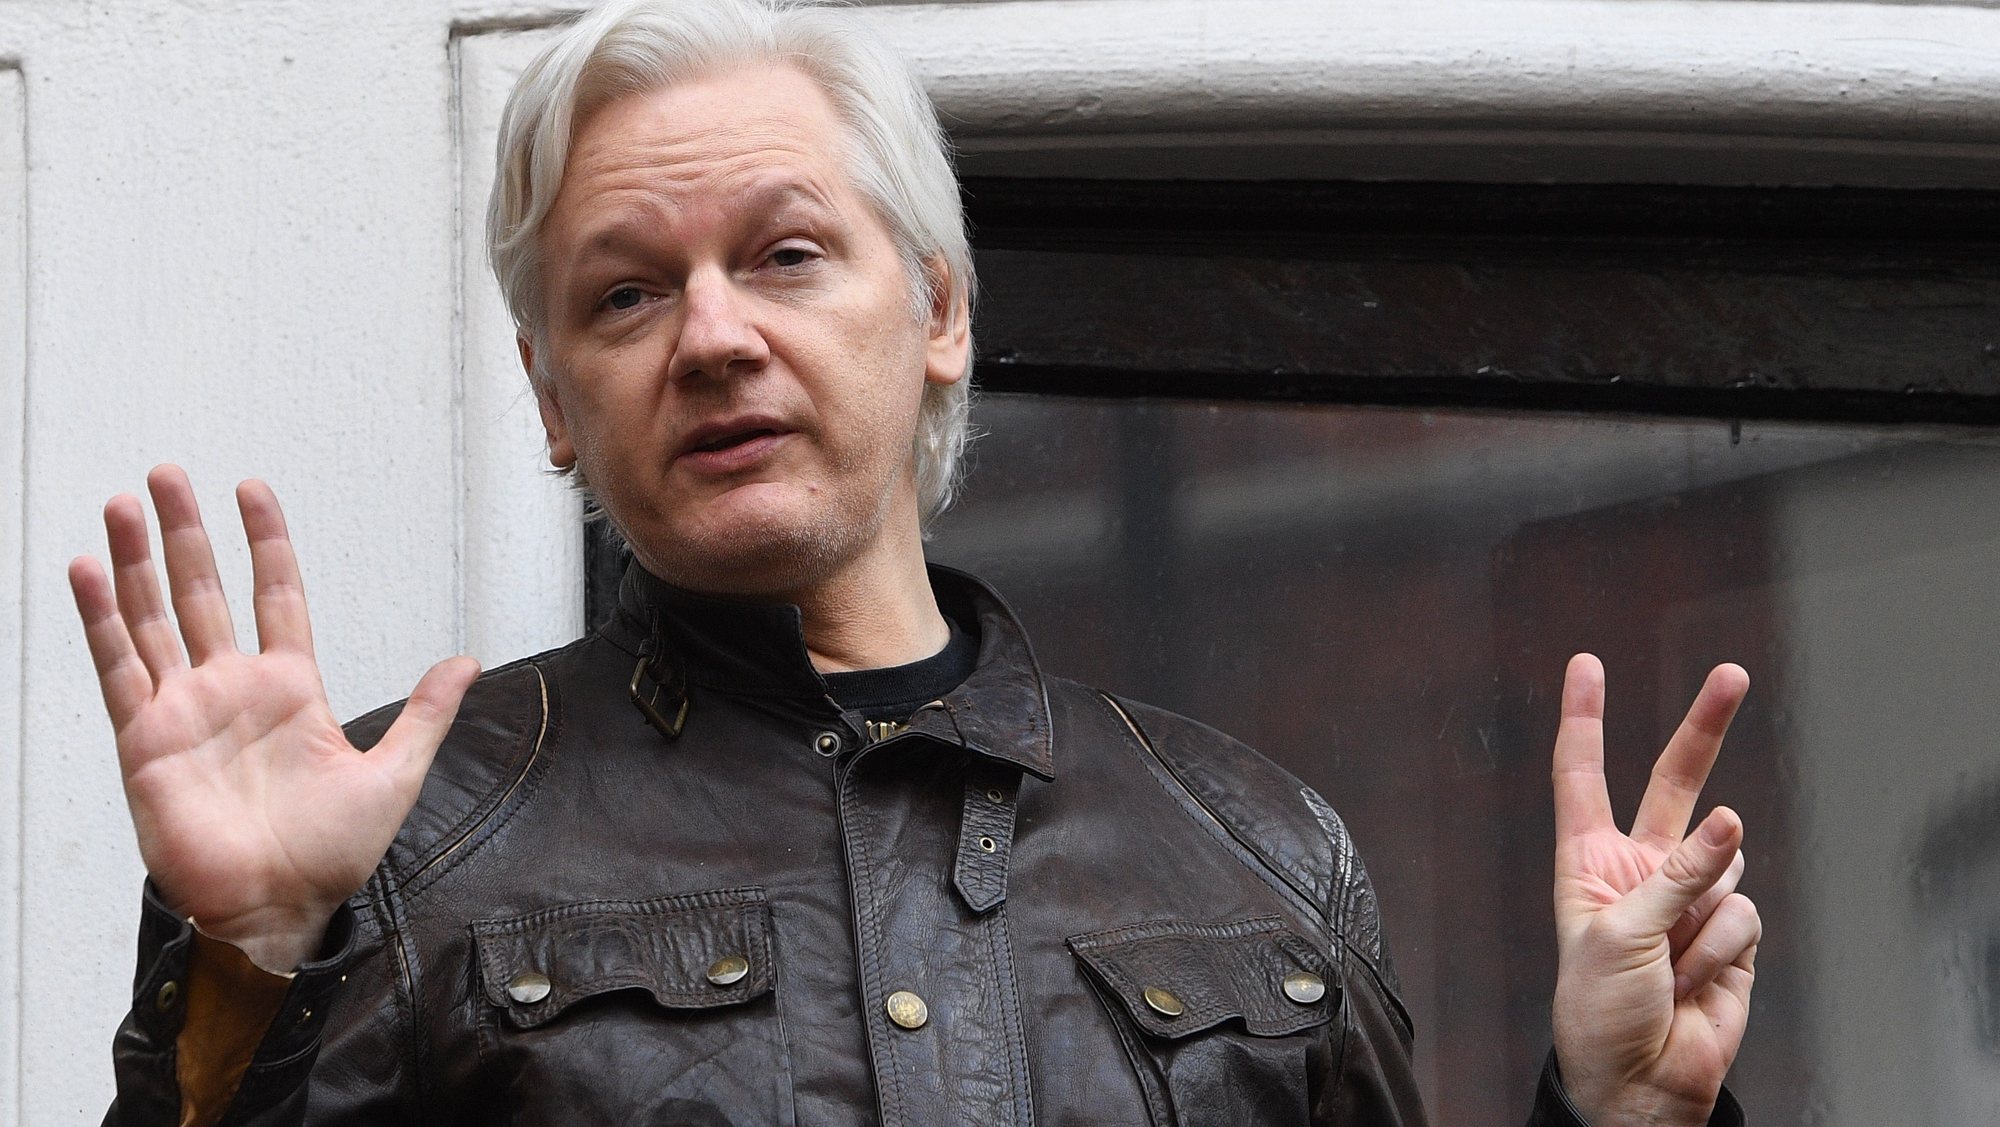 epa07539717 (FILE) - Wikileaks founder Julian Assange speaks to reporters on the balcony of the Ecuadorian Embassy in London, Britain, 19 May 2017 (reissued 01 May 2019). Reports on 01 May 2019 state Wikileaks founder Julian Assange has been sentenced by a court in London to 50 weeks in jail for breaching his bail in 2012. Assange breached his bail in 2012 by entering the Ecuadorean embassy in London in a bid to avoid being extradited to Sweden to face allegations of rape and sexual assault. Assange was arrested at Ecuadorean embassy in March 2019.  EPA/FACUNDO ARRIZABALAGA *** Local Caption *** 55004940